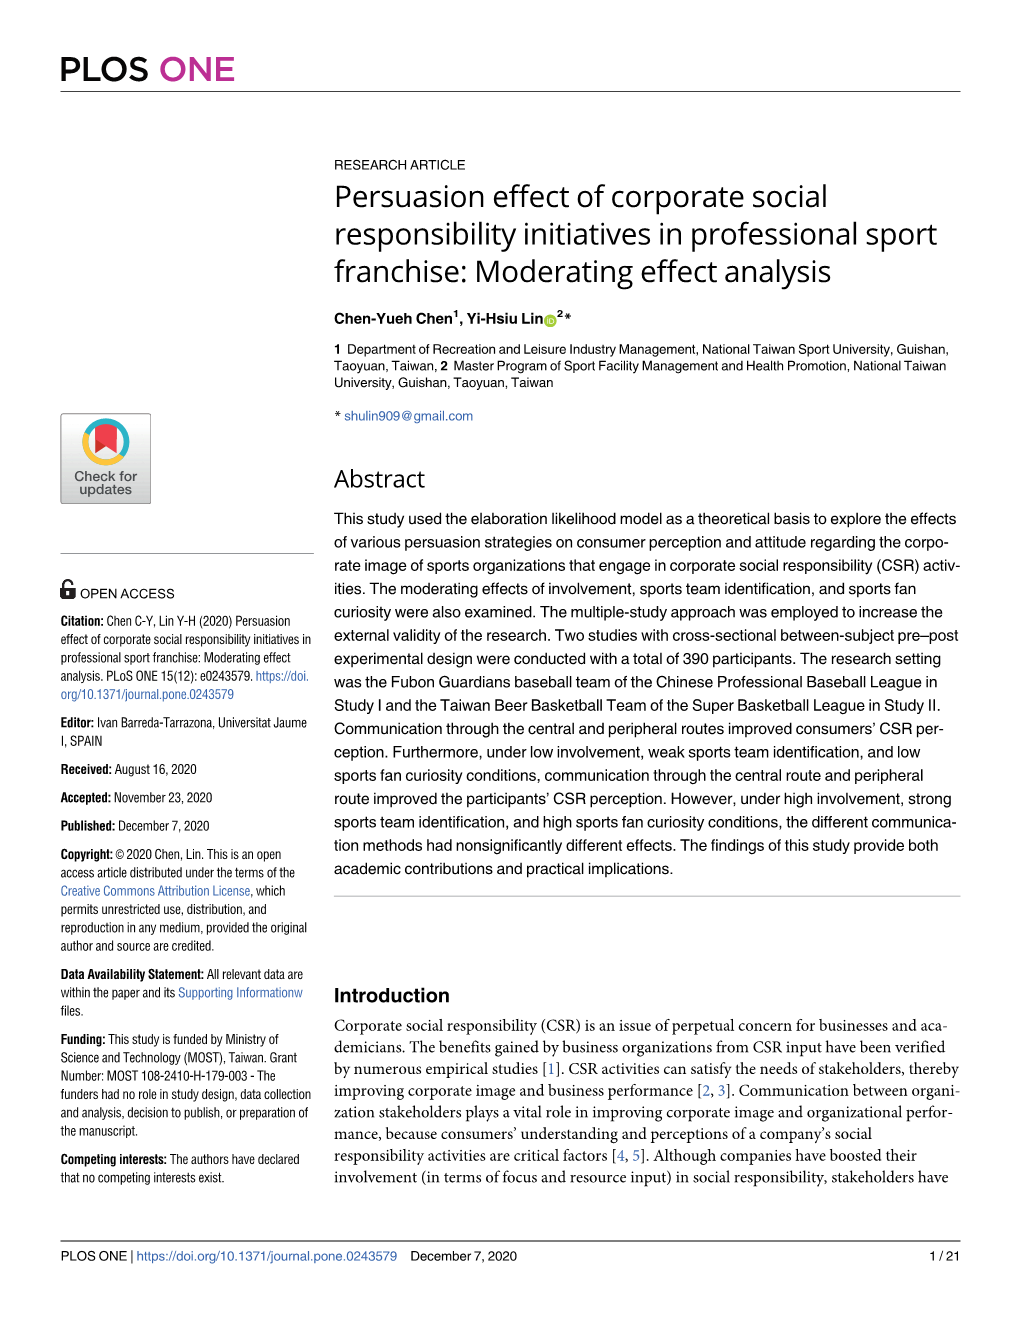 Persuasion Effect of Corporate Social Responsibility Initiatives in Professional Sport Franchise: Moderating Effect Analysis